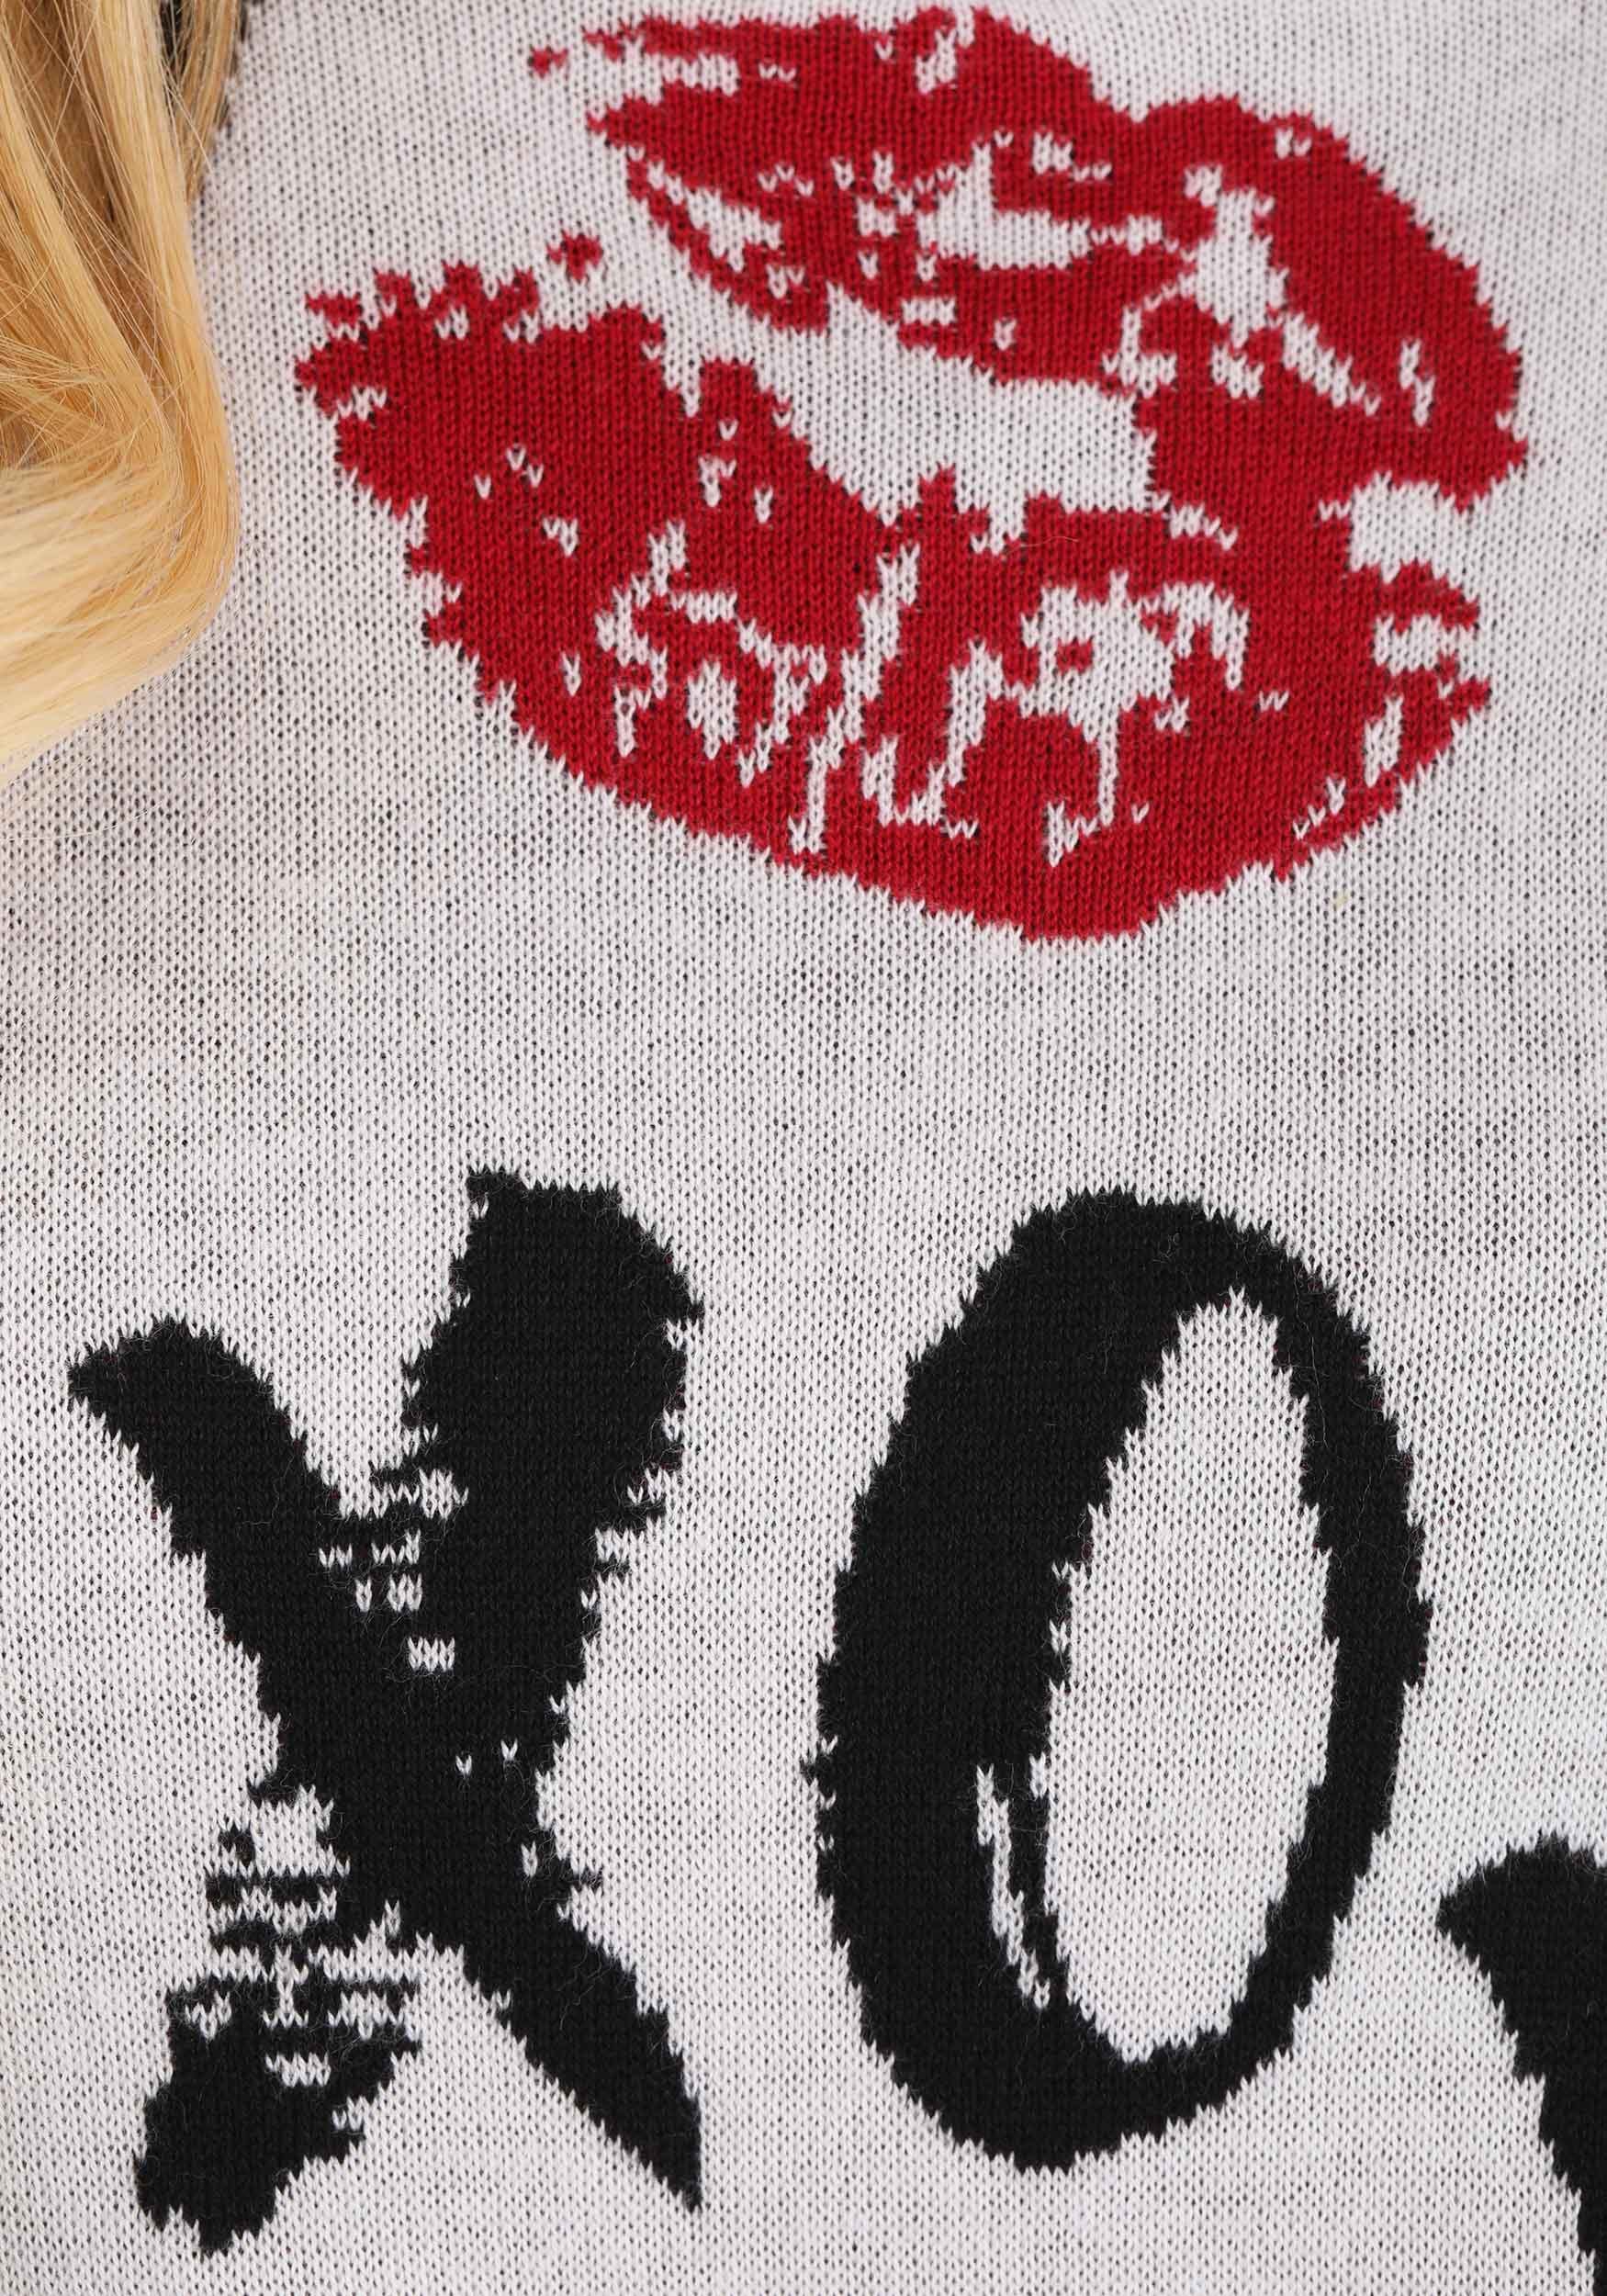 Adult Hugs And Kisses Valentine's Day Sweater